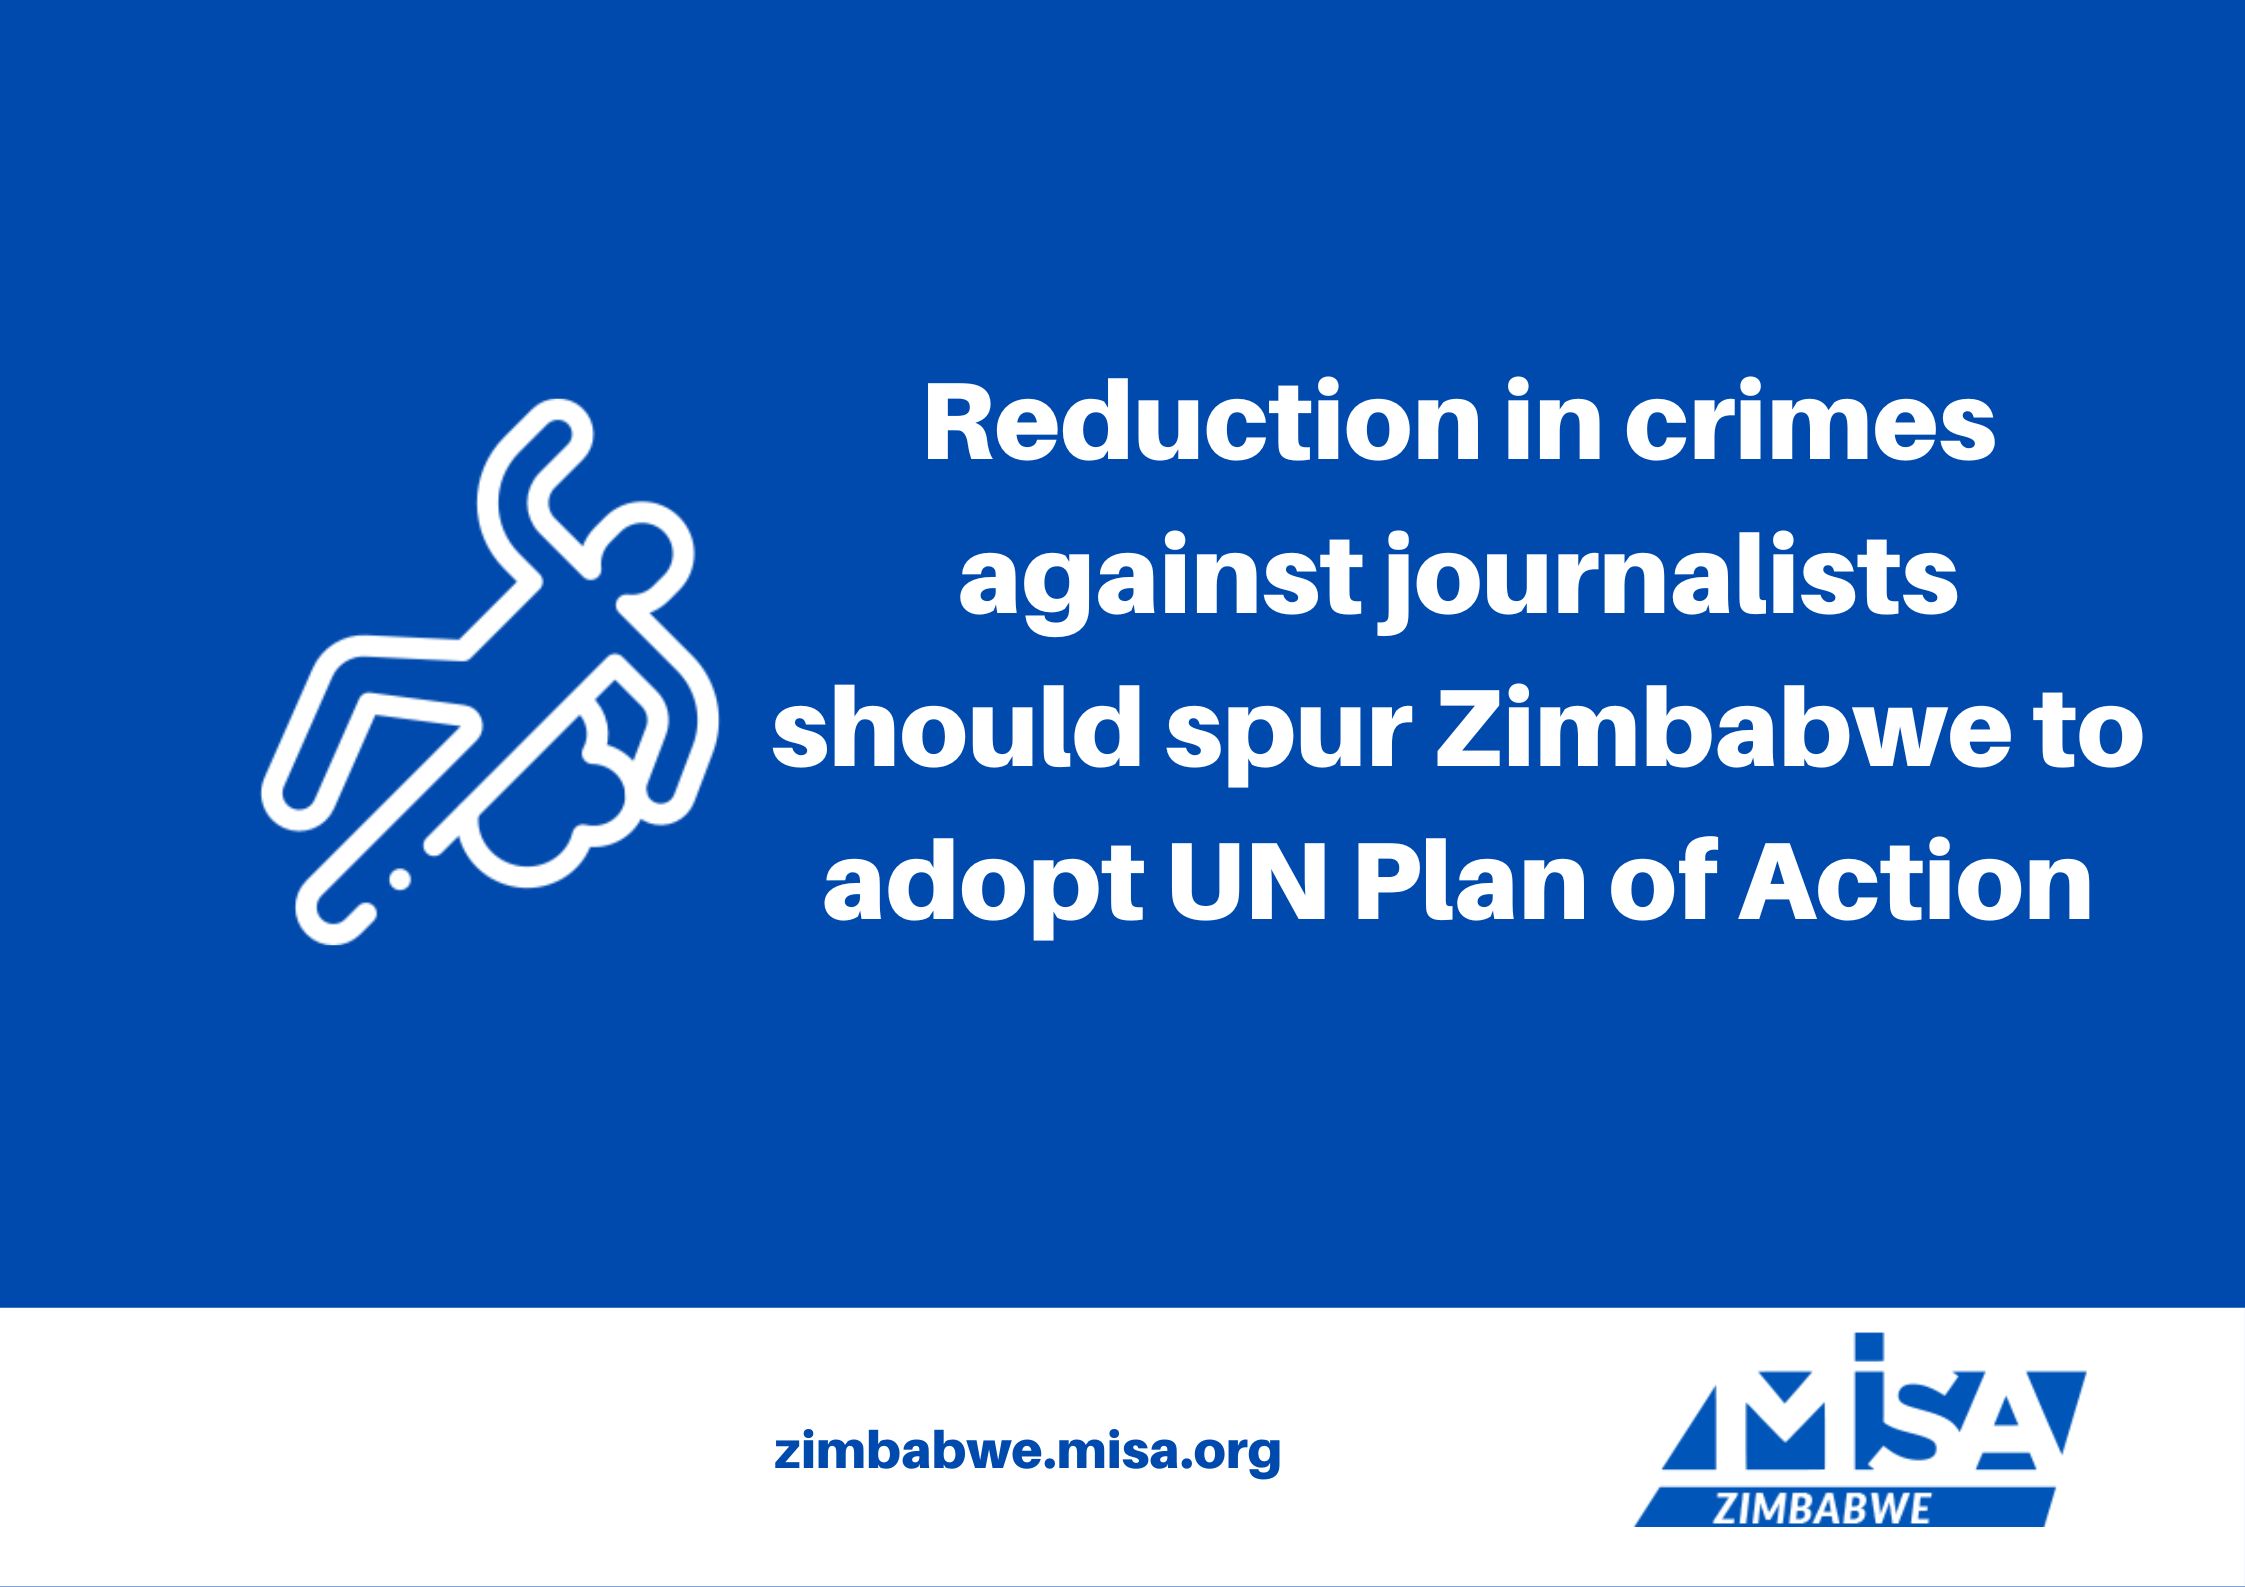 Reduction in crimes against journalists should spur Zimbabwe to adopt UN Plan of Action